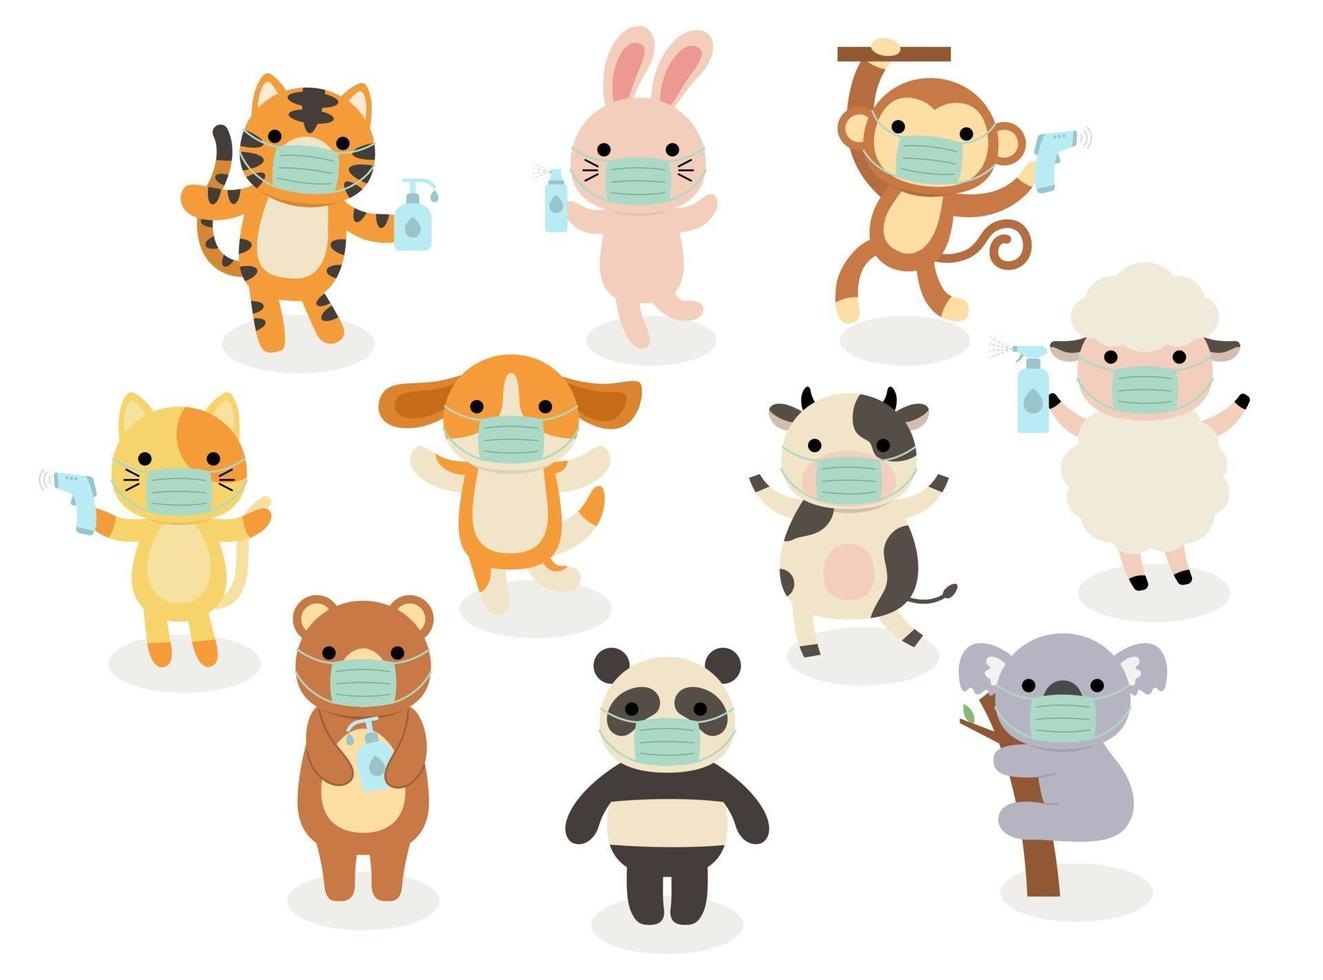 Big set of isolated animals. Vector collection of activity, wearing face mask, sanitizing, temperature checking, funny animals. Cute animals cat, rabbit, dog, monkey, cow, tiger, Koala, bear, panda in cartoon style.